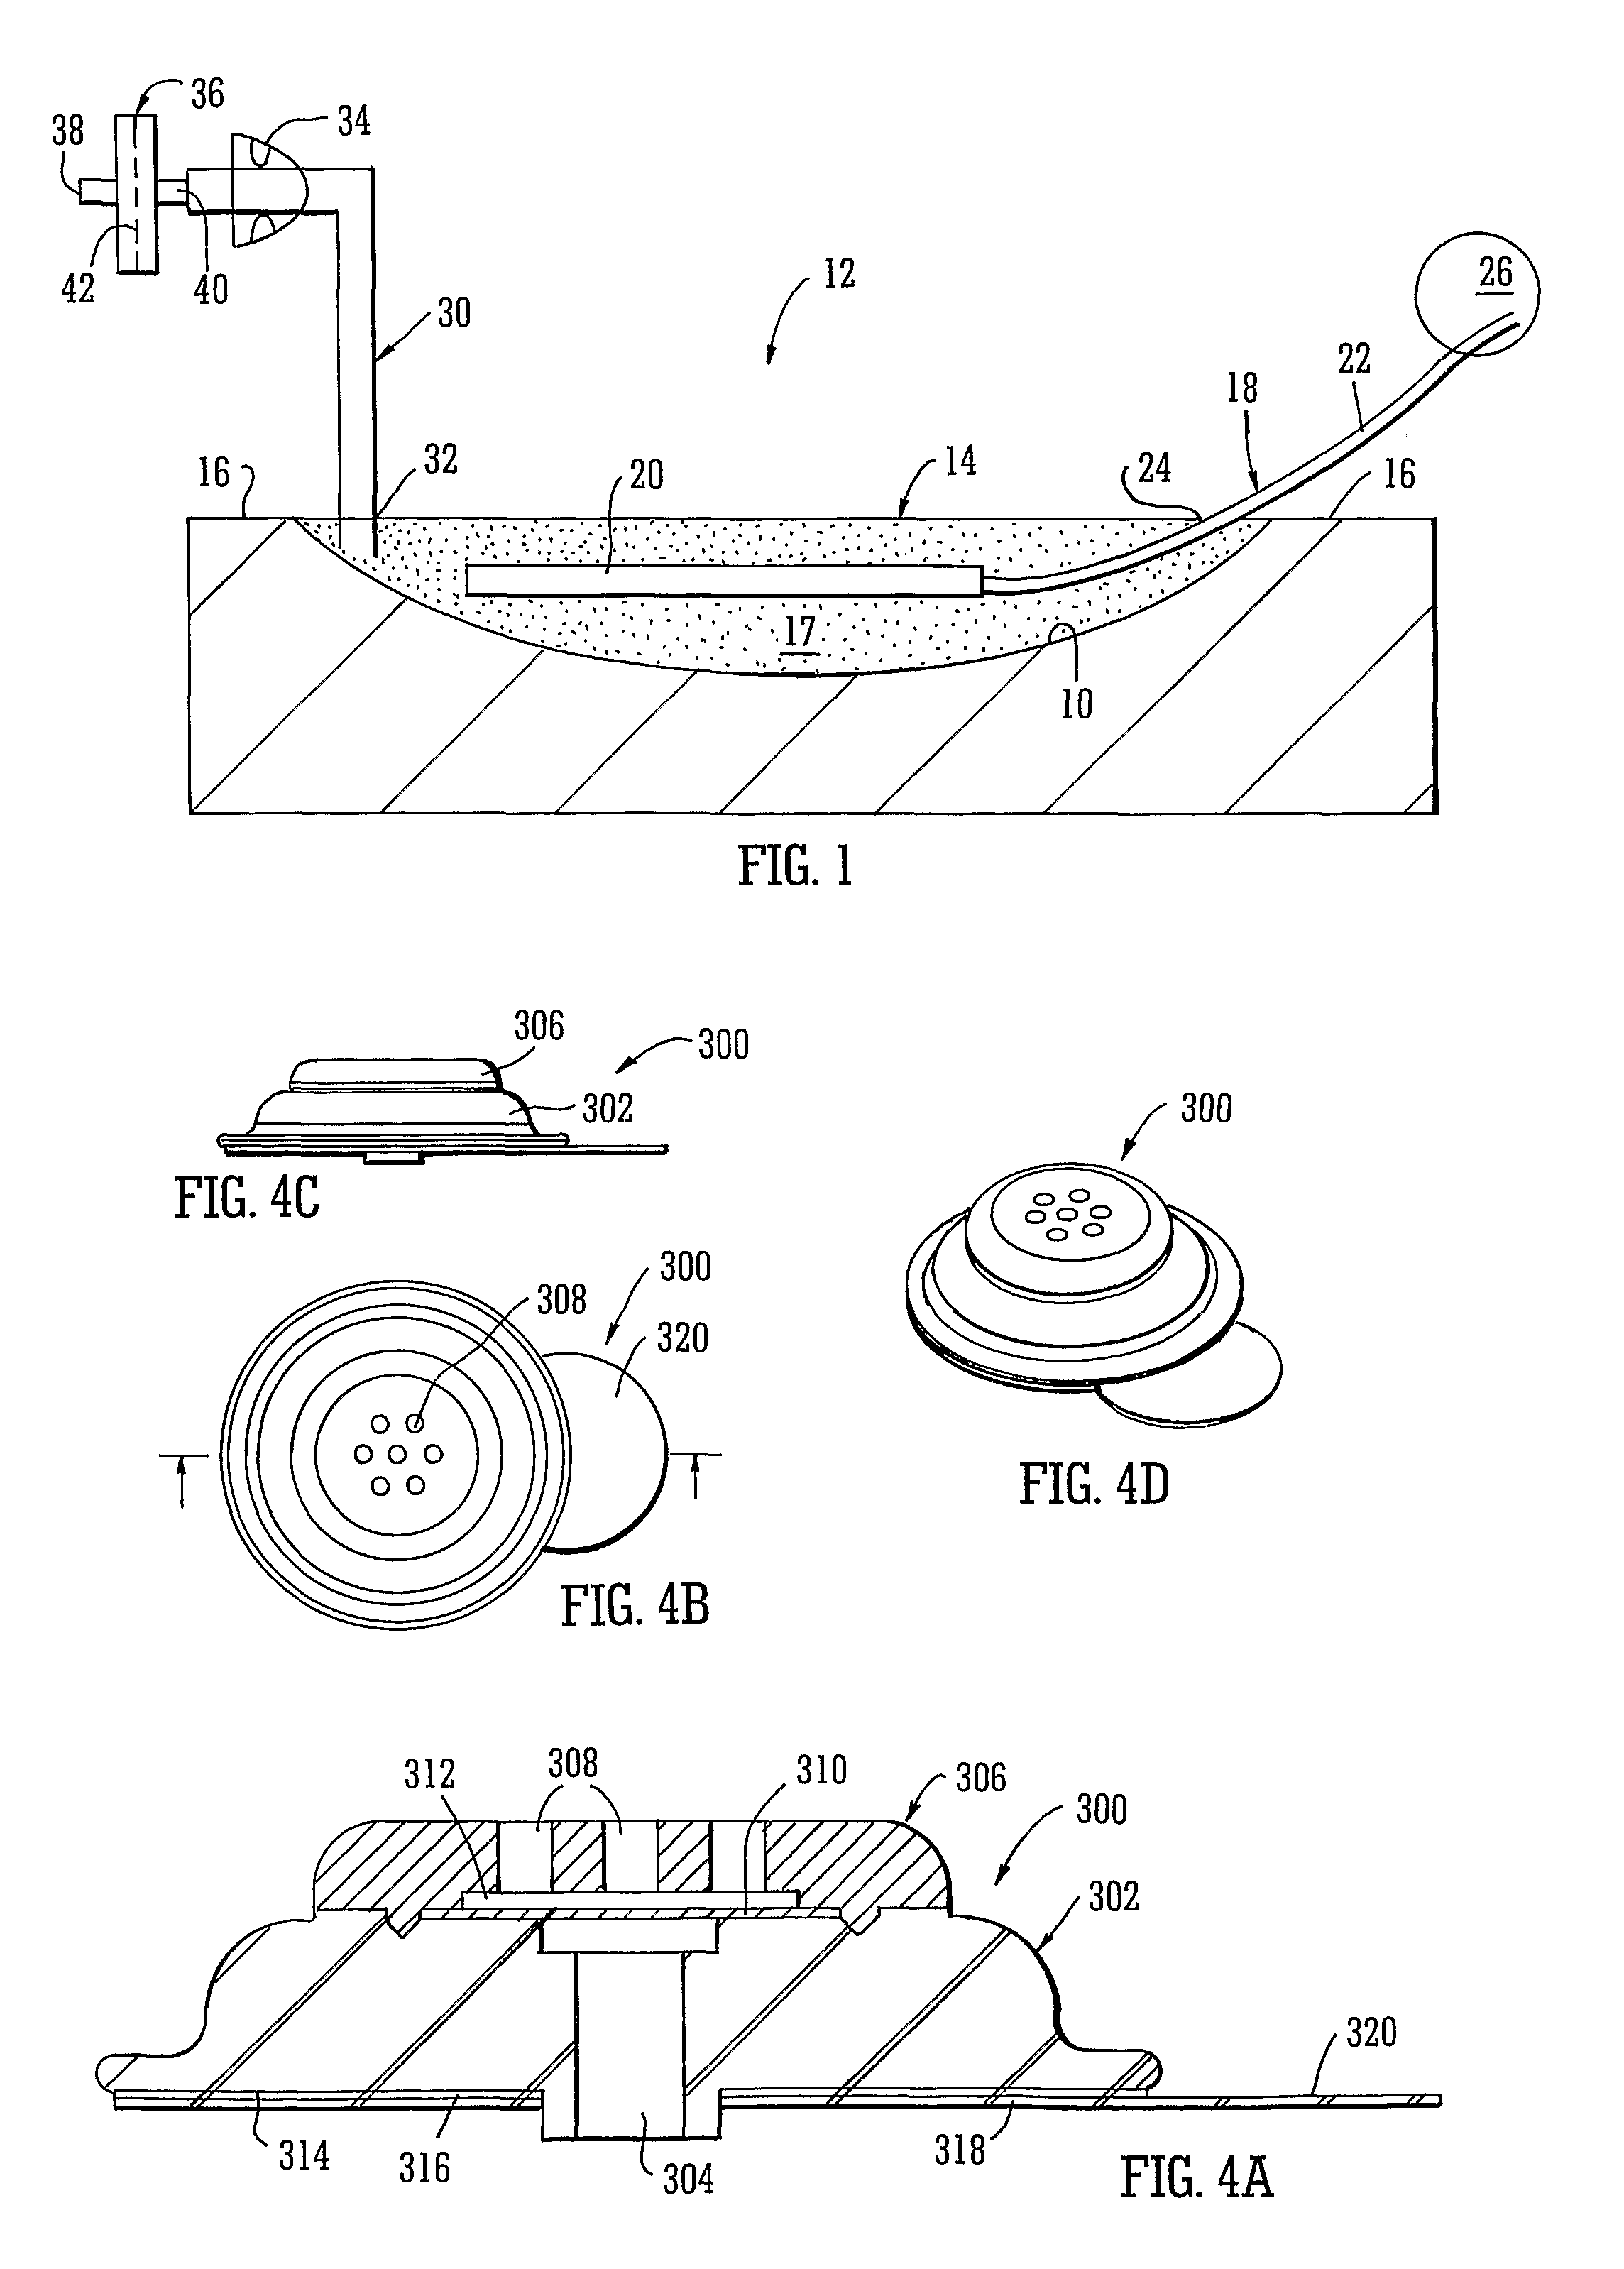 Apparatus for topical negative pressure therapy